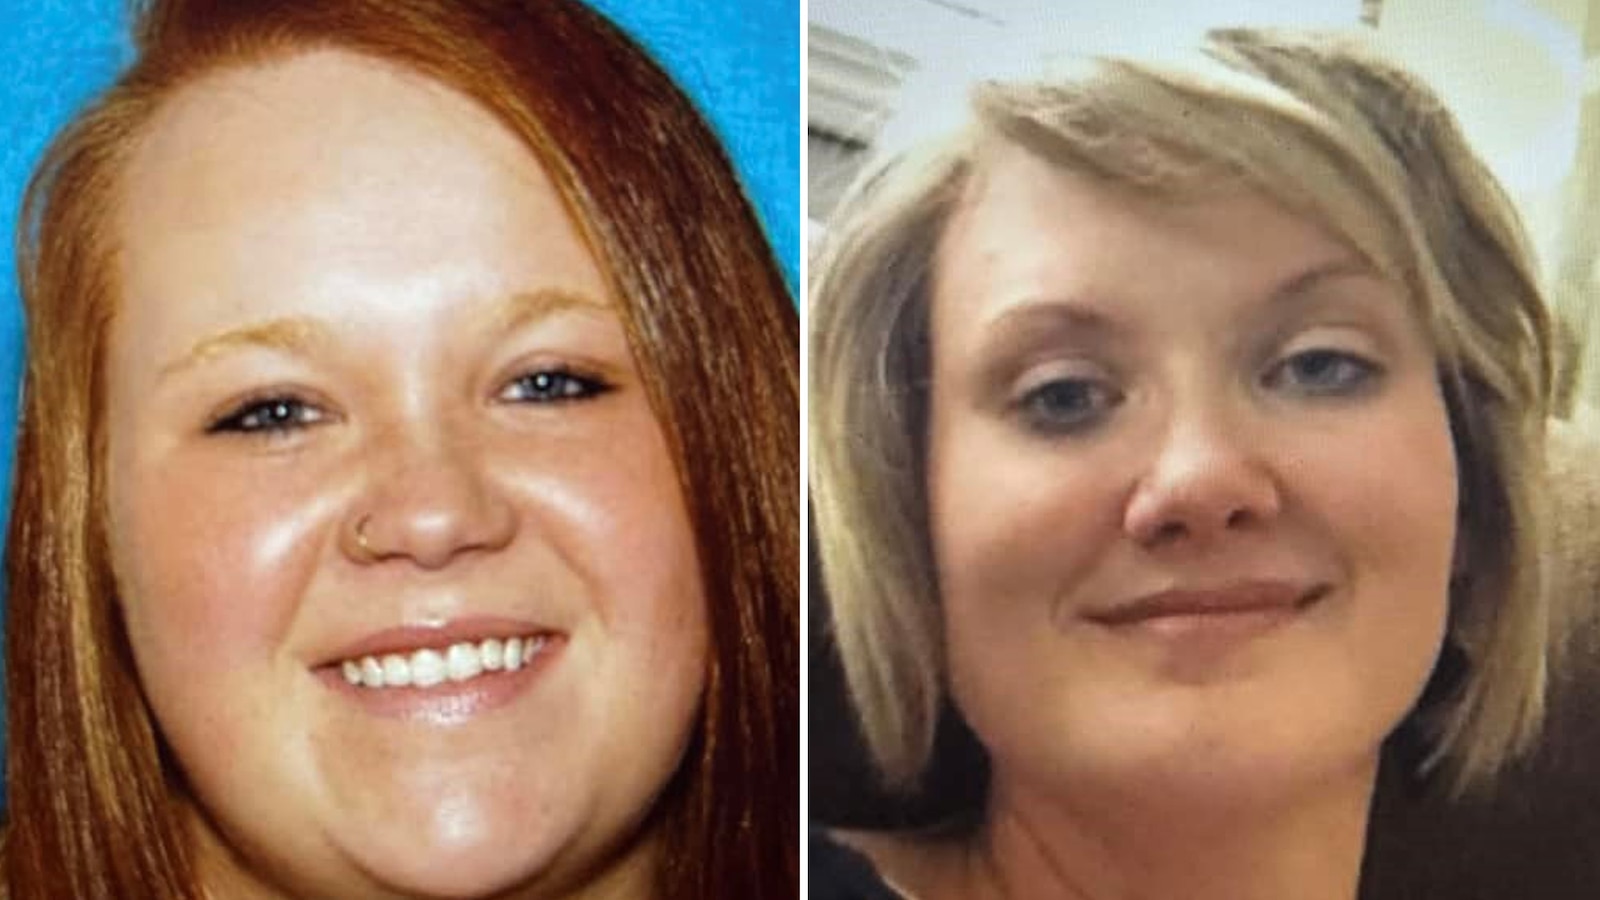 'Foul play' suspected in case of missing moms, police say